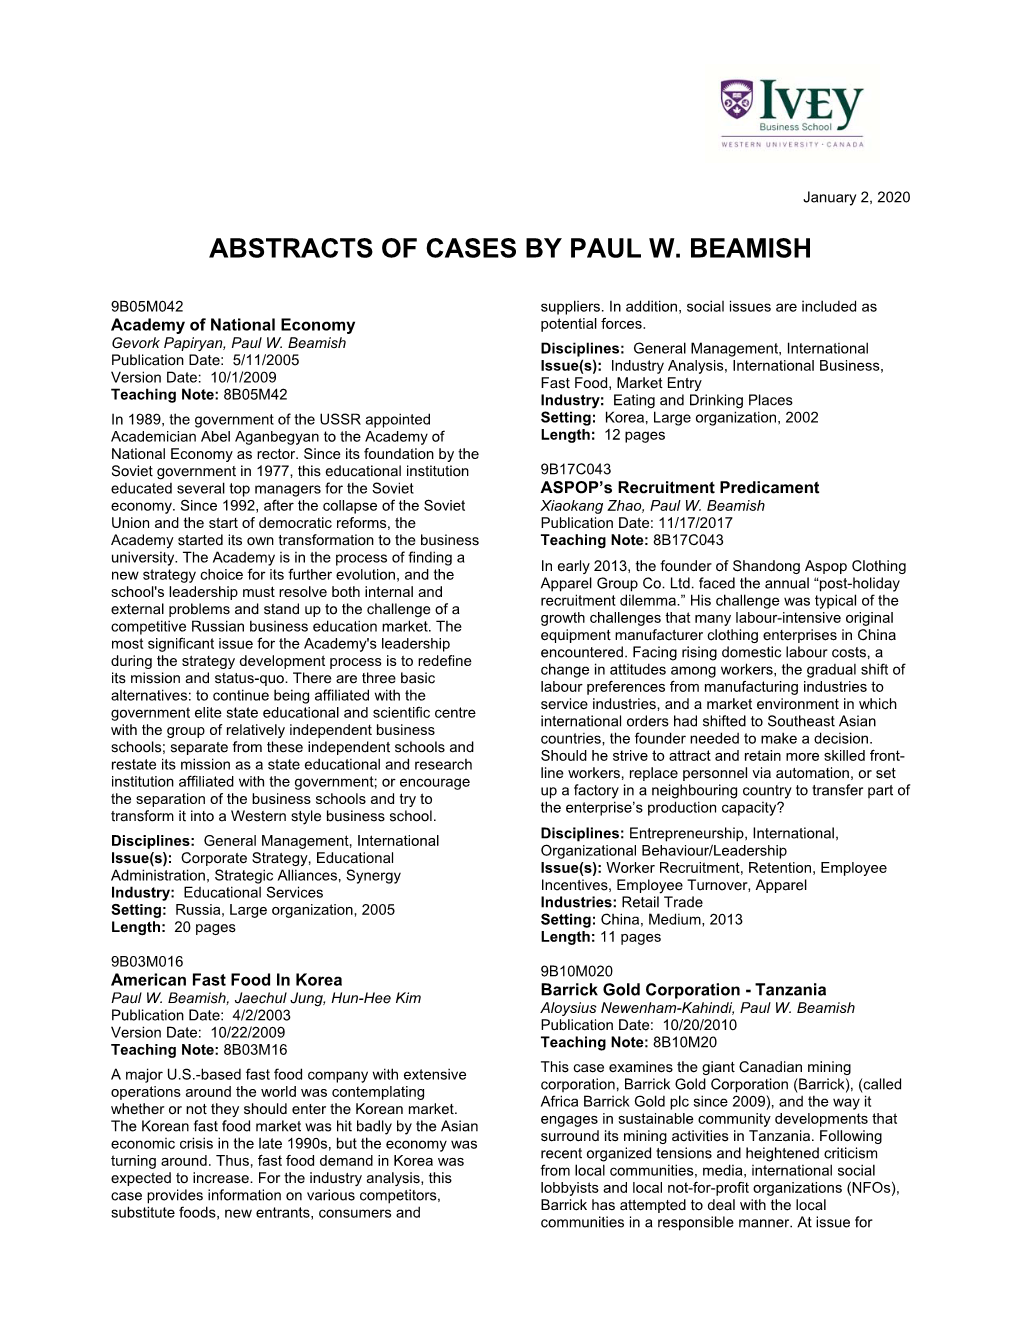 Abstracts of Cases by Paul W. Beamish